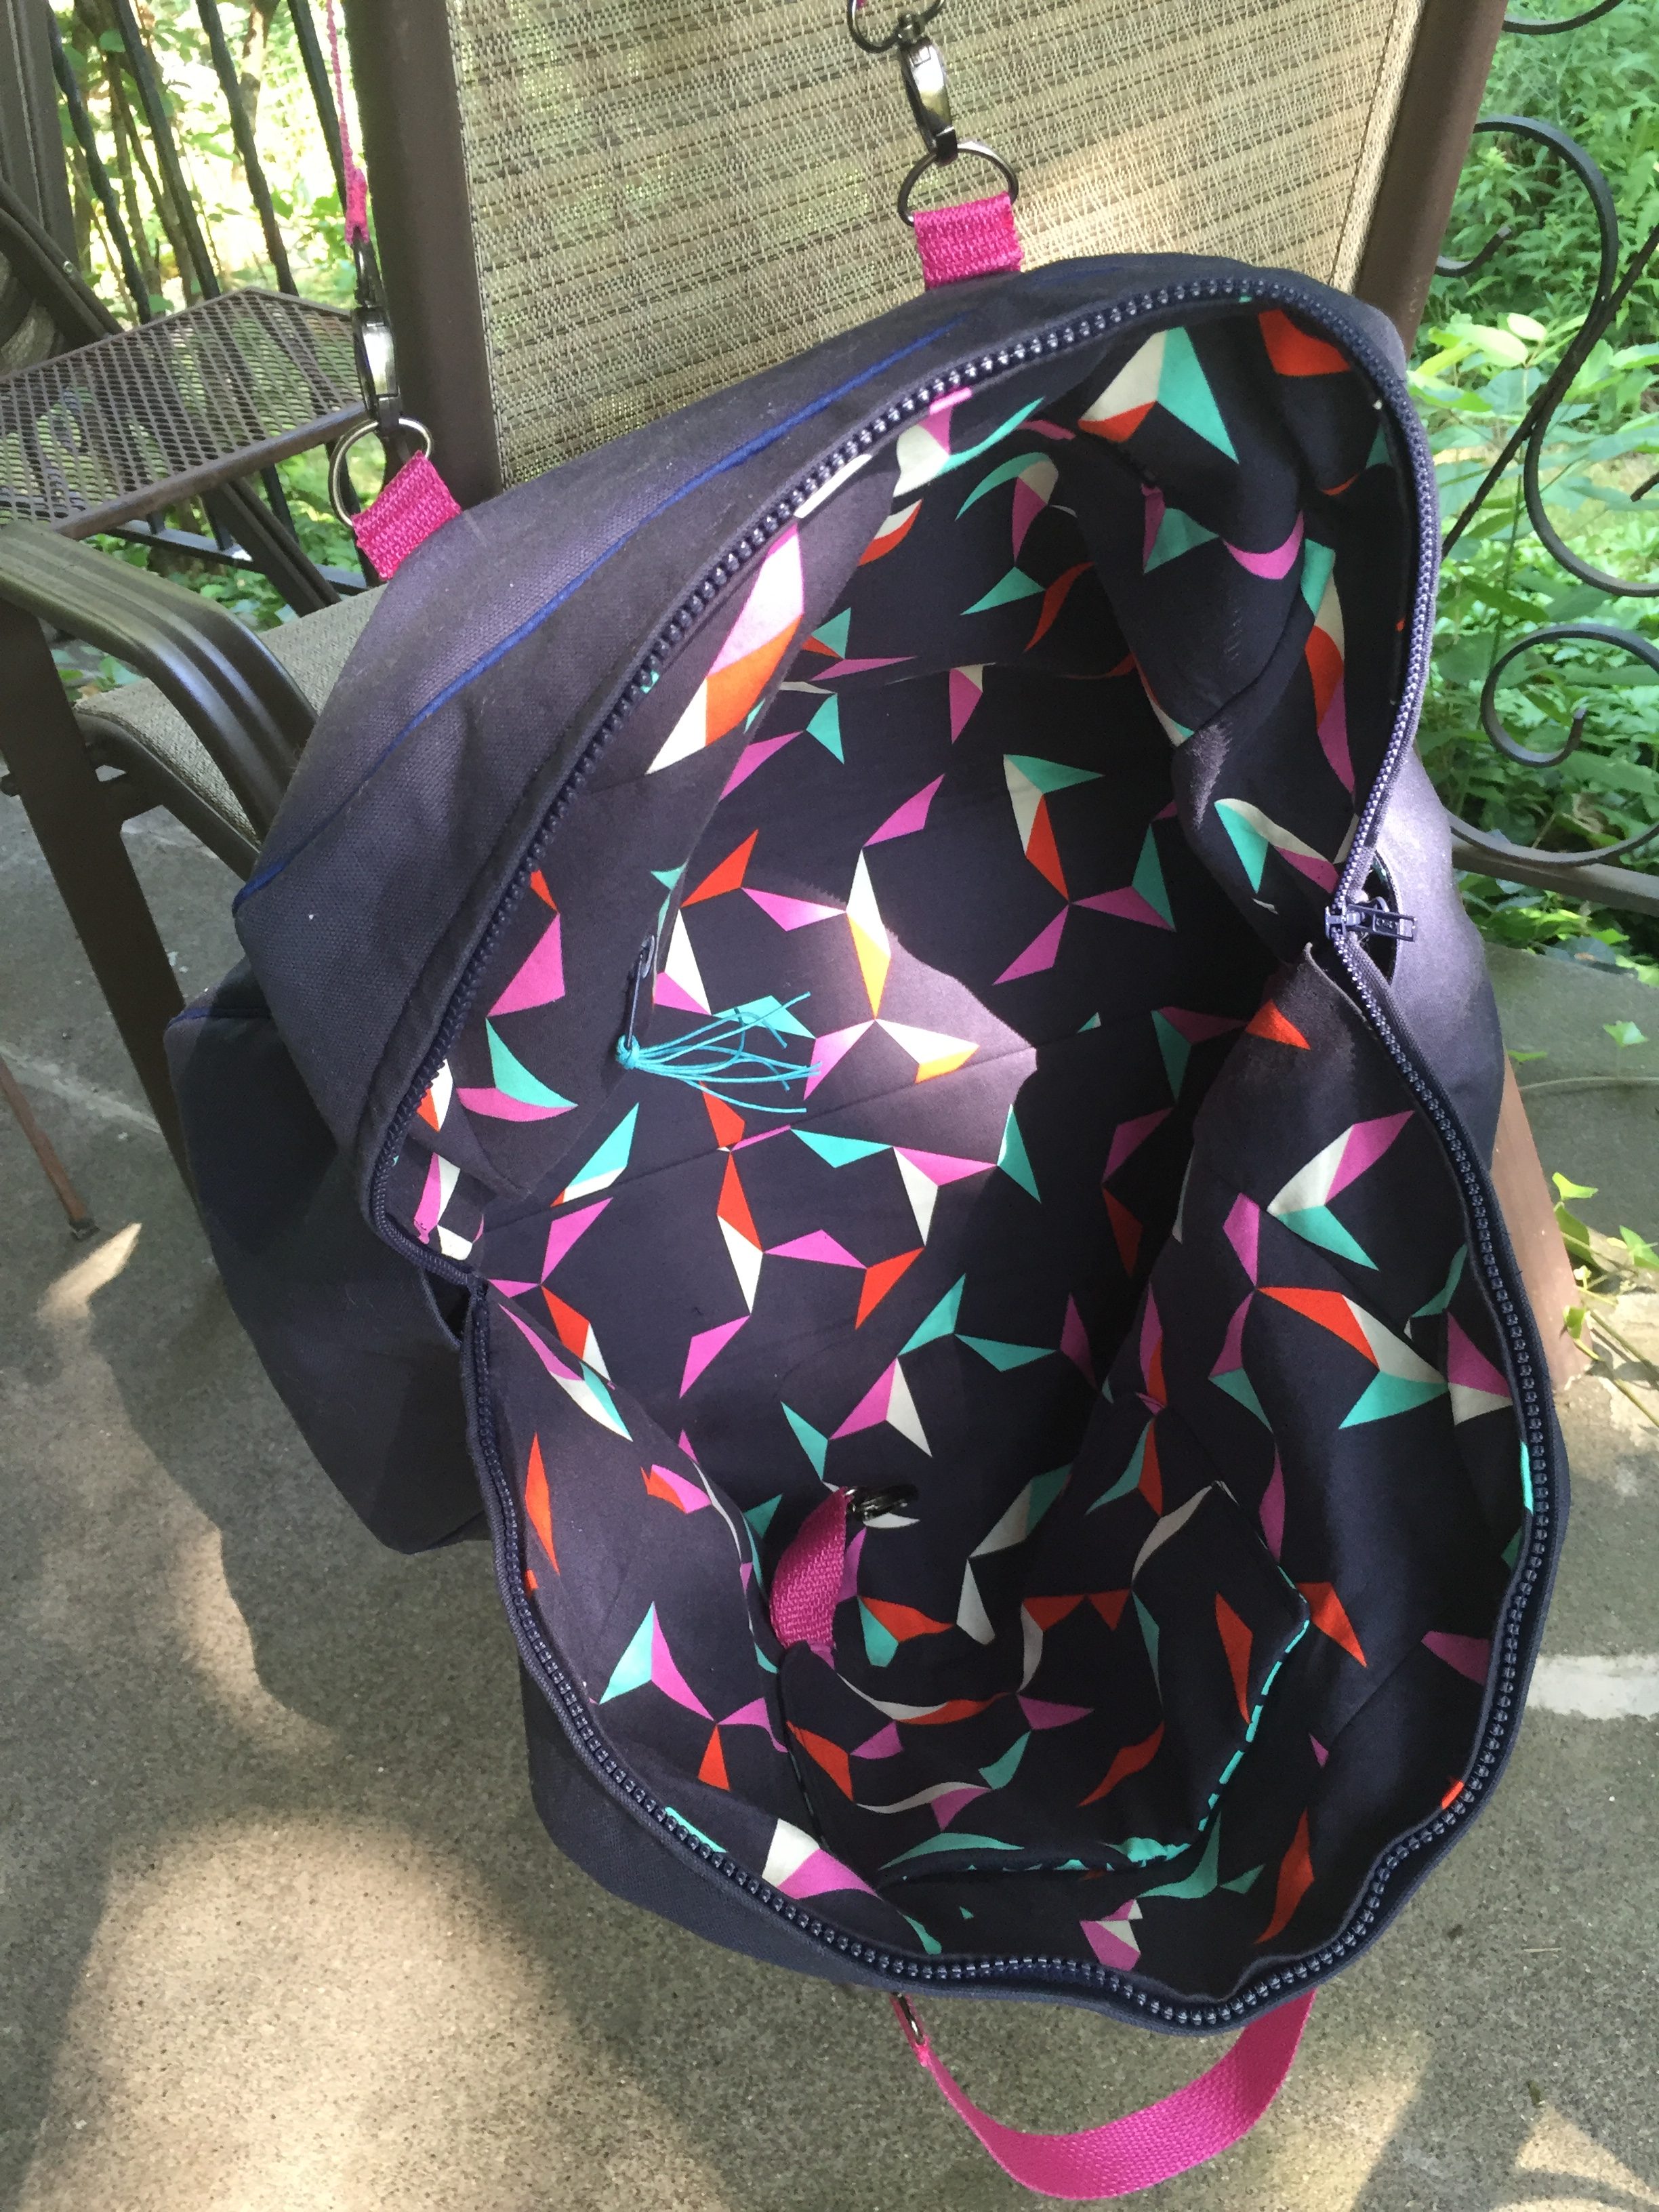 A Carry-On for Me – Exploring Creativity, One Project at a Time